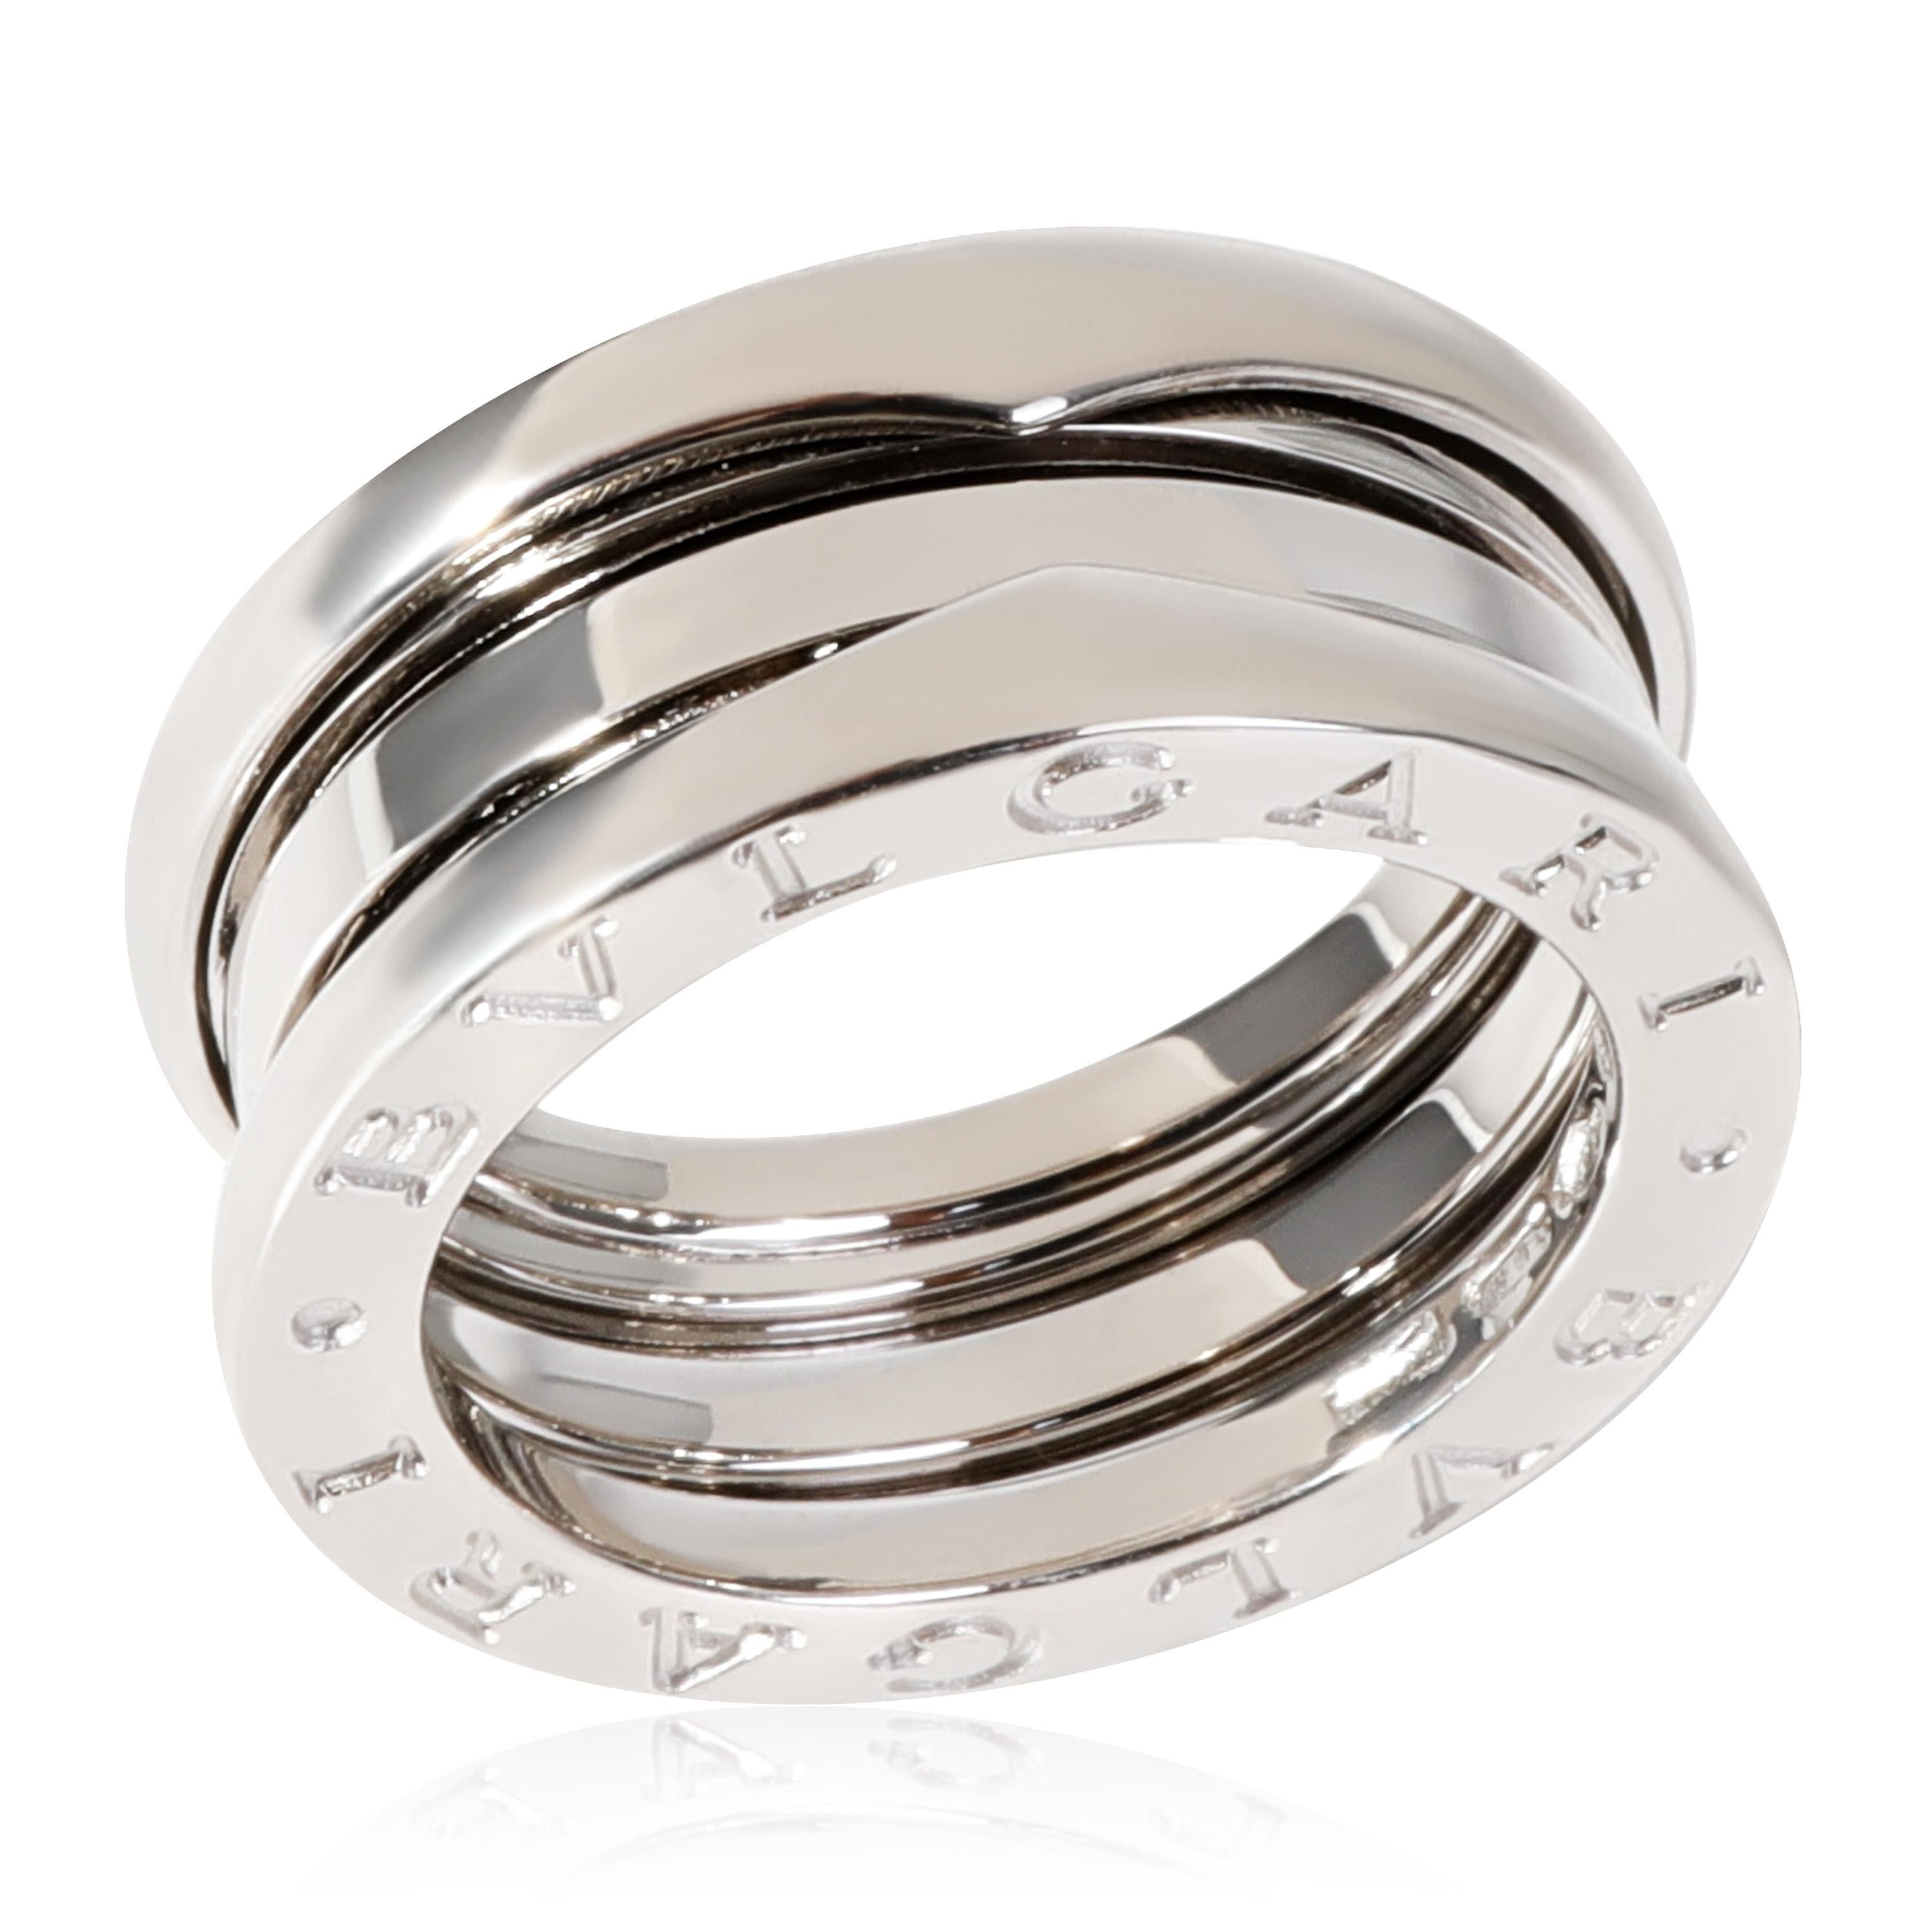 BVLGARI B.zero1 Ring in 18k White Gold

PRIMARY DETAILS
SKU: 119552
Listing Title: BVLGARI B.zero1 Ring in 18k White Gold
Condition Description: Retails for 2560 USD. In excellent condition and recently polished. Ring size is 5.0. Comes with Box.